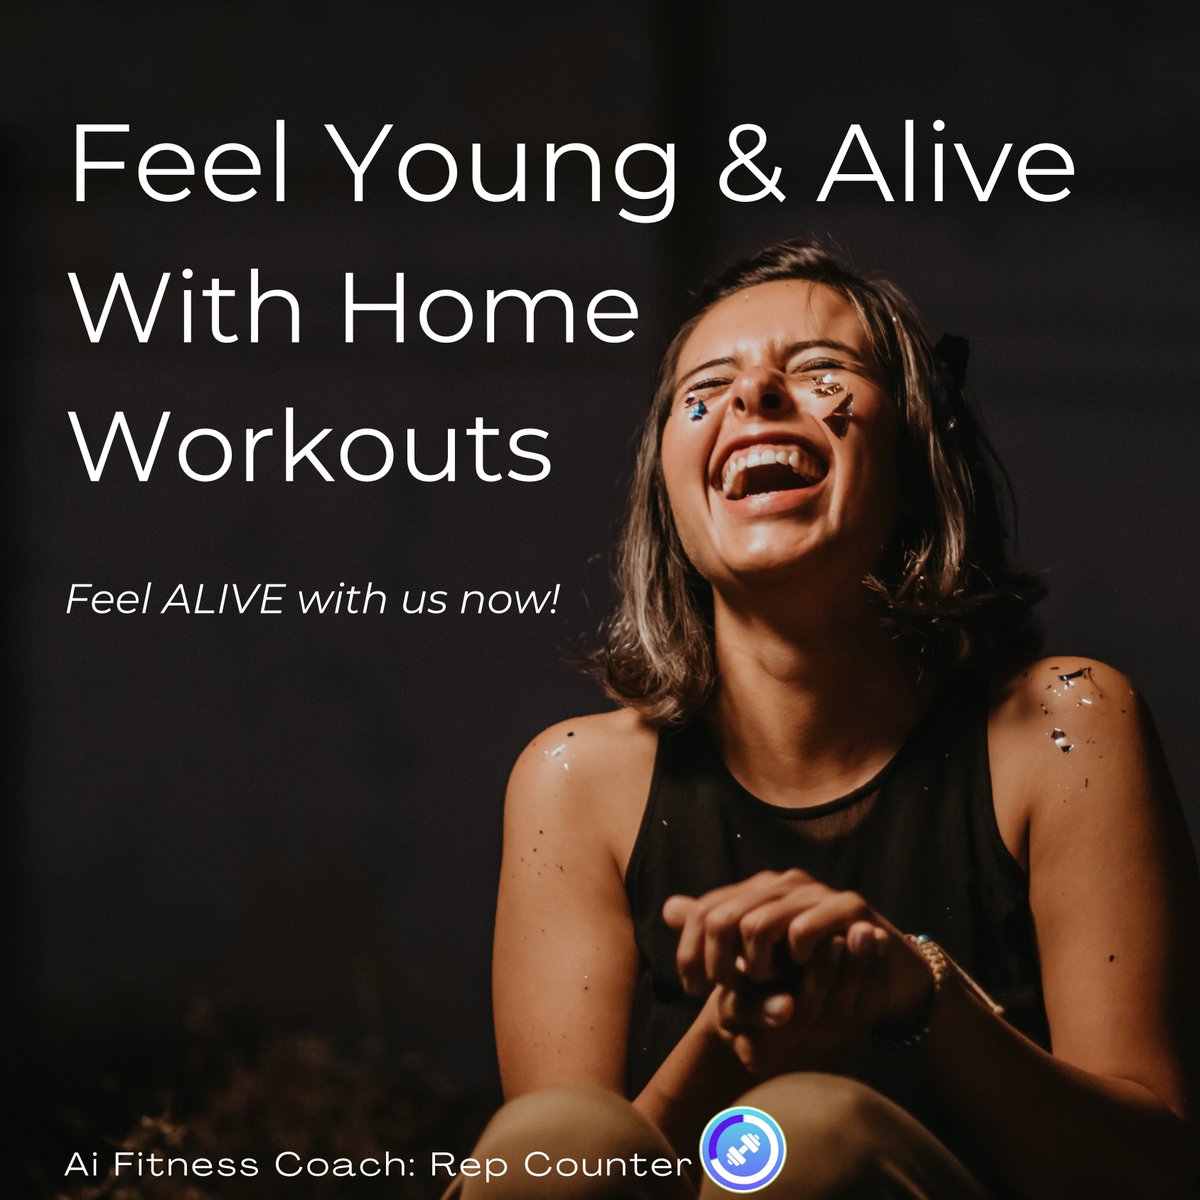 With just a few simple exercises at home, you'll feel like you're living your best life, even better than before! So start moving and feel the power within you.
#homeworkout #workout #workoutmotivation #motivation #homefitness #aifitnesscoach